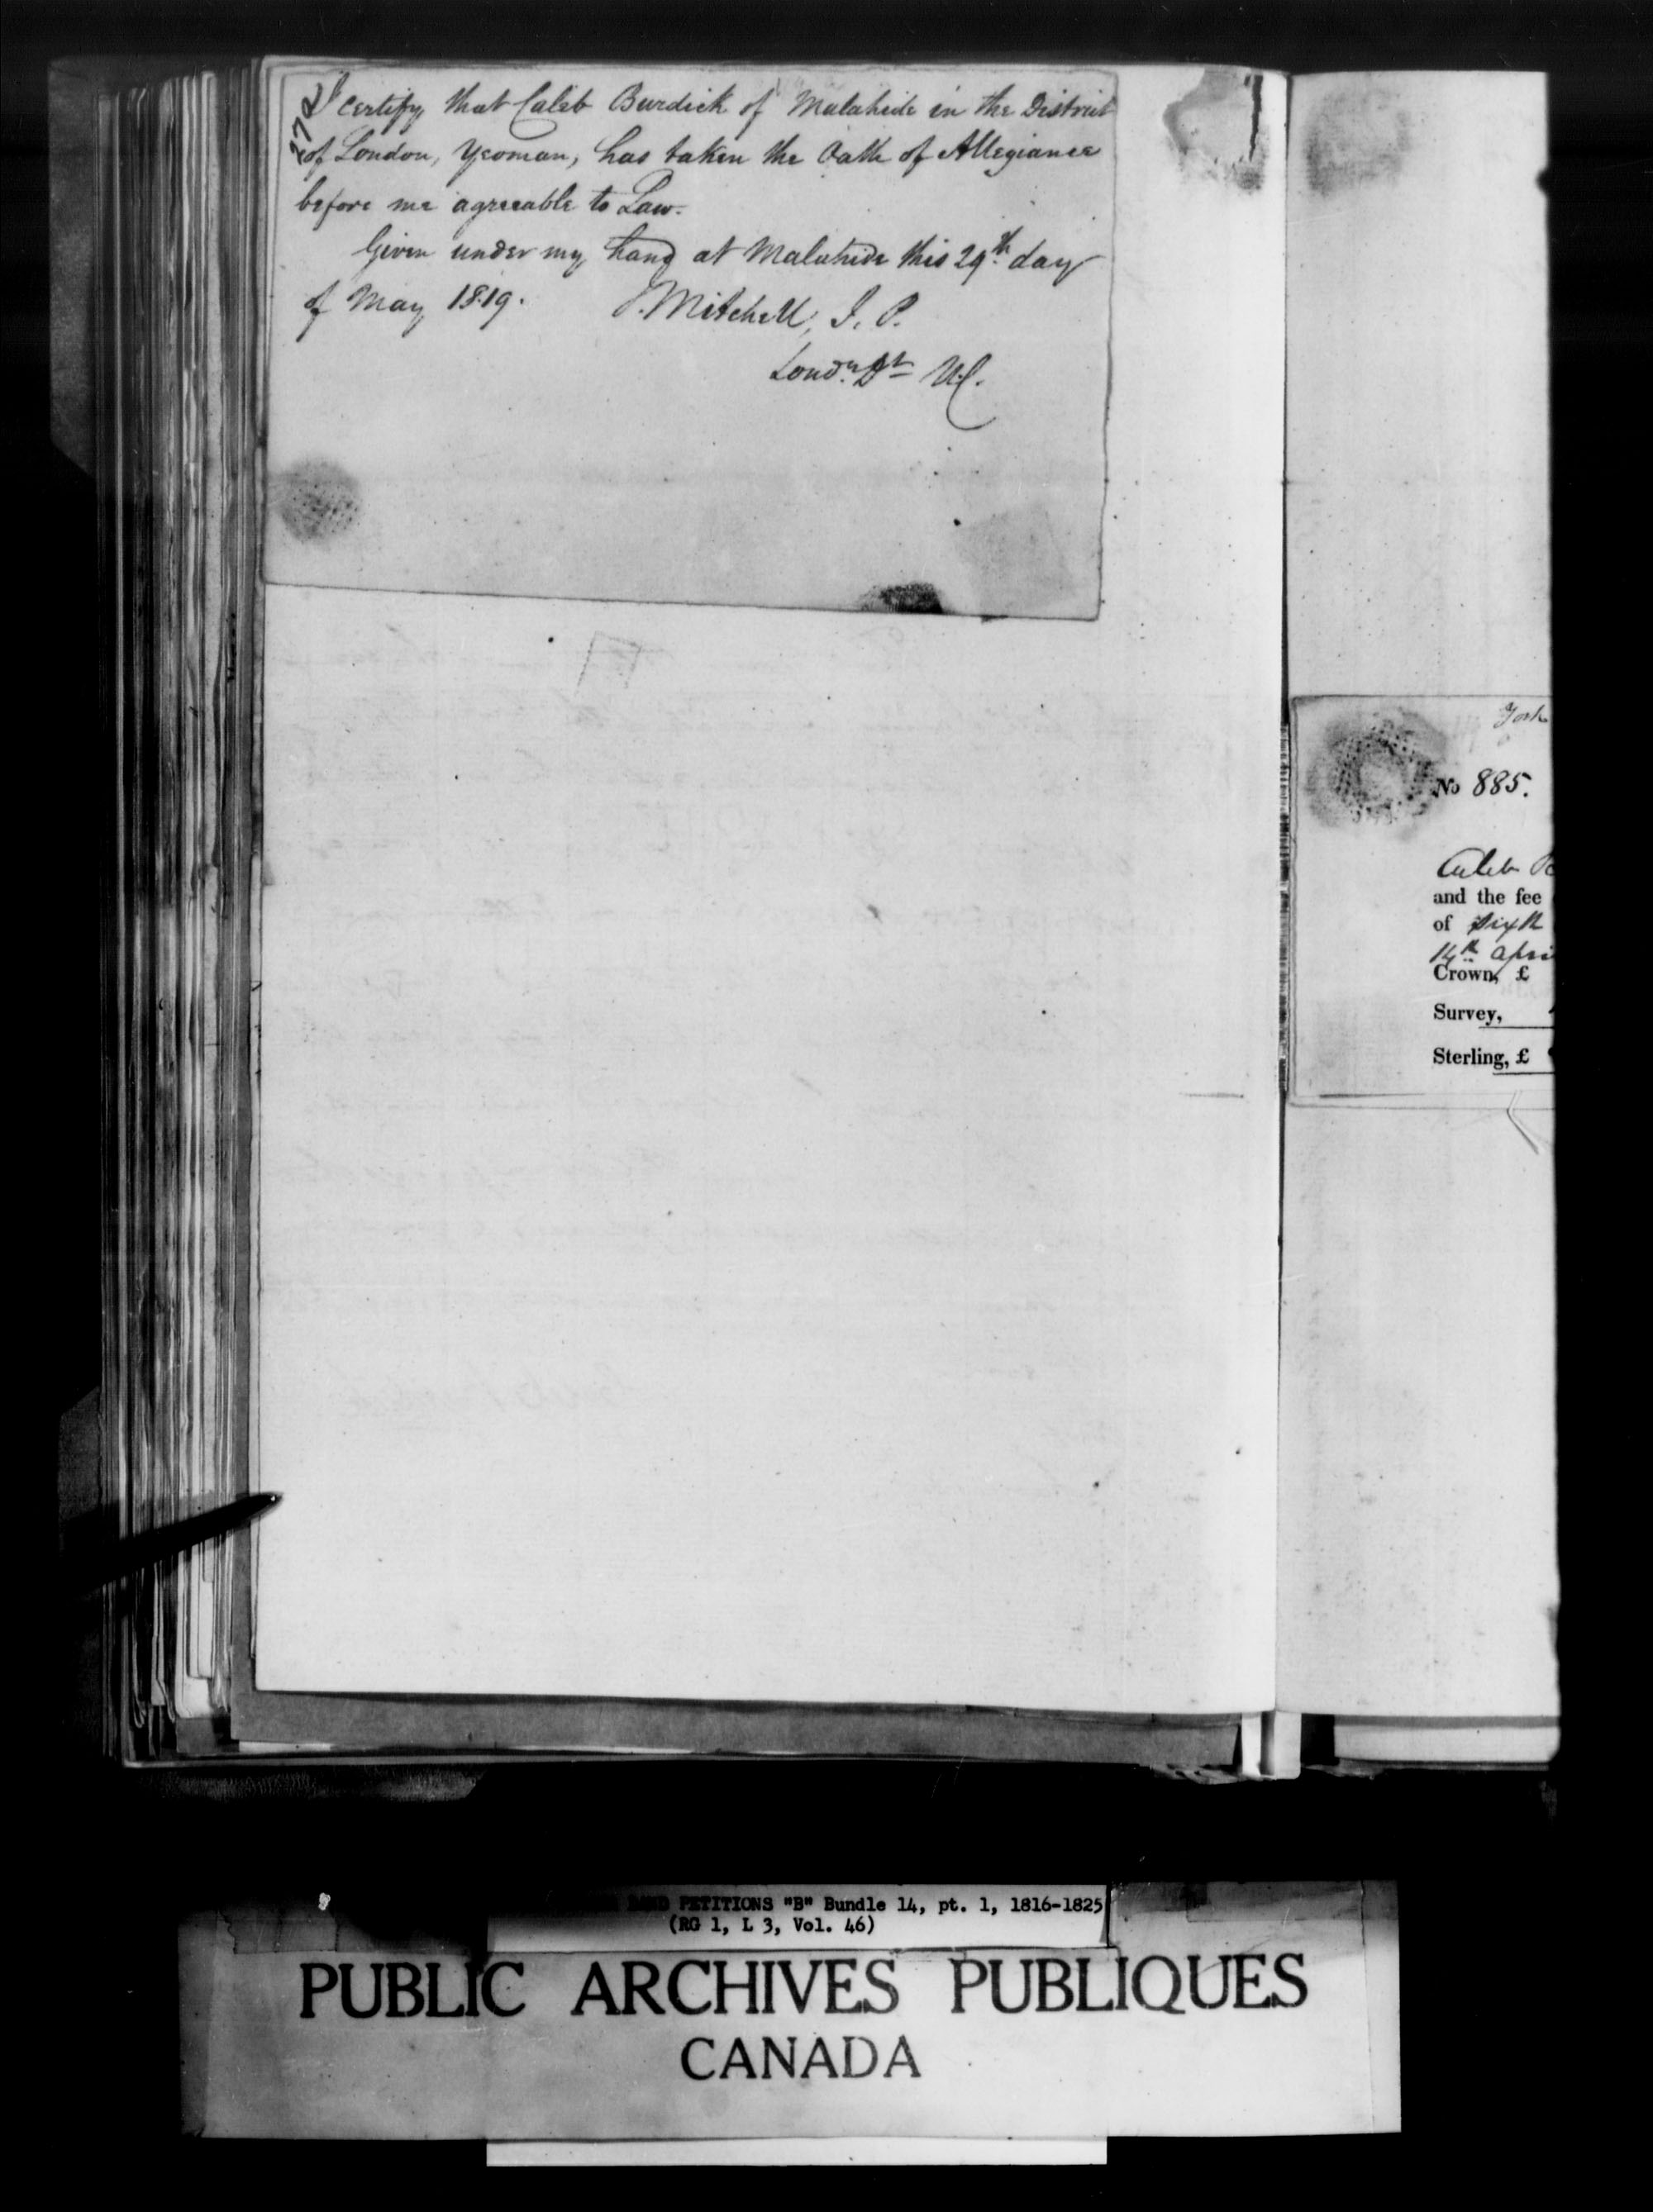 Title: Upper Canada Land Petitions (1763-1865) - Mikan Number: 205131 - Microform: c-1626